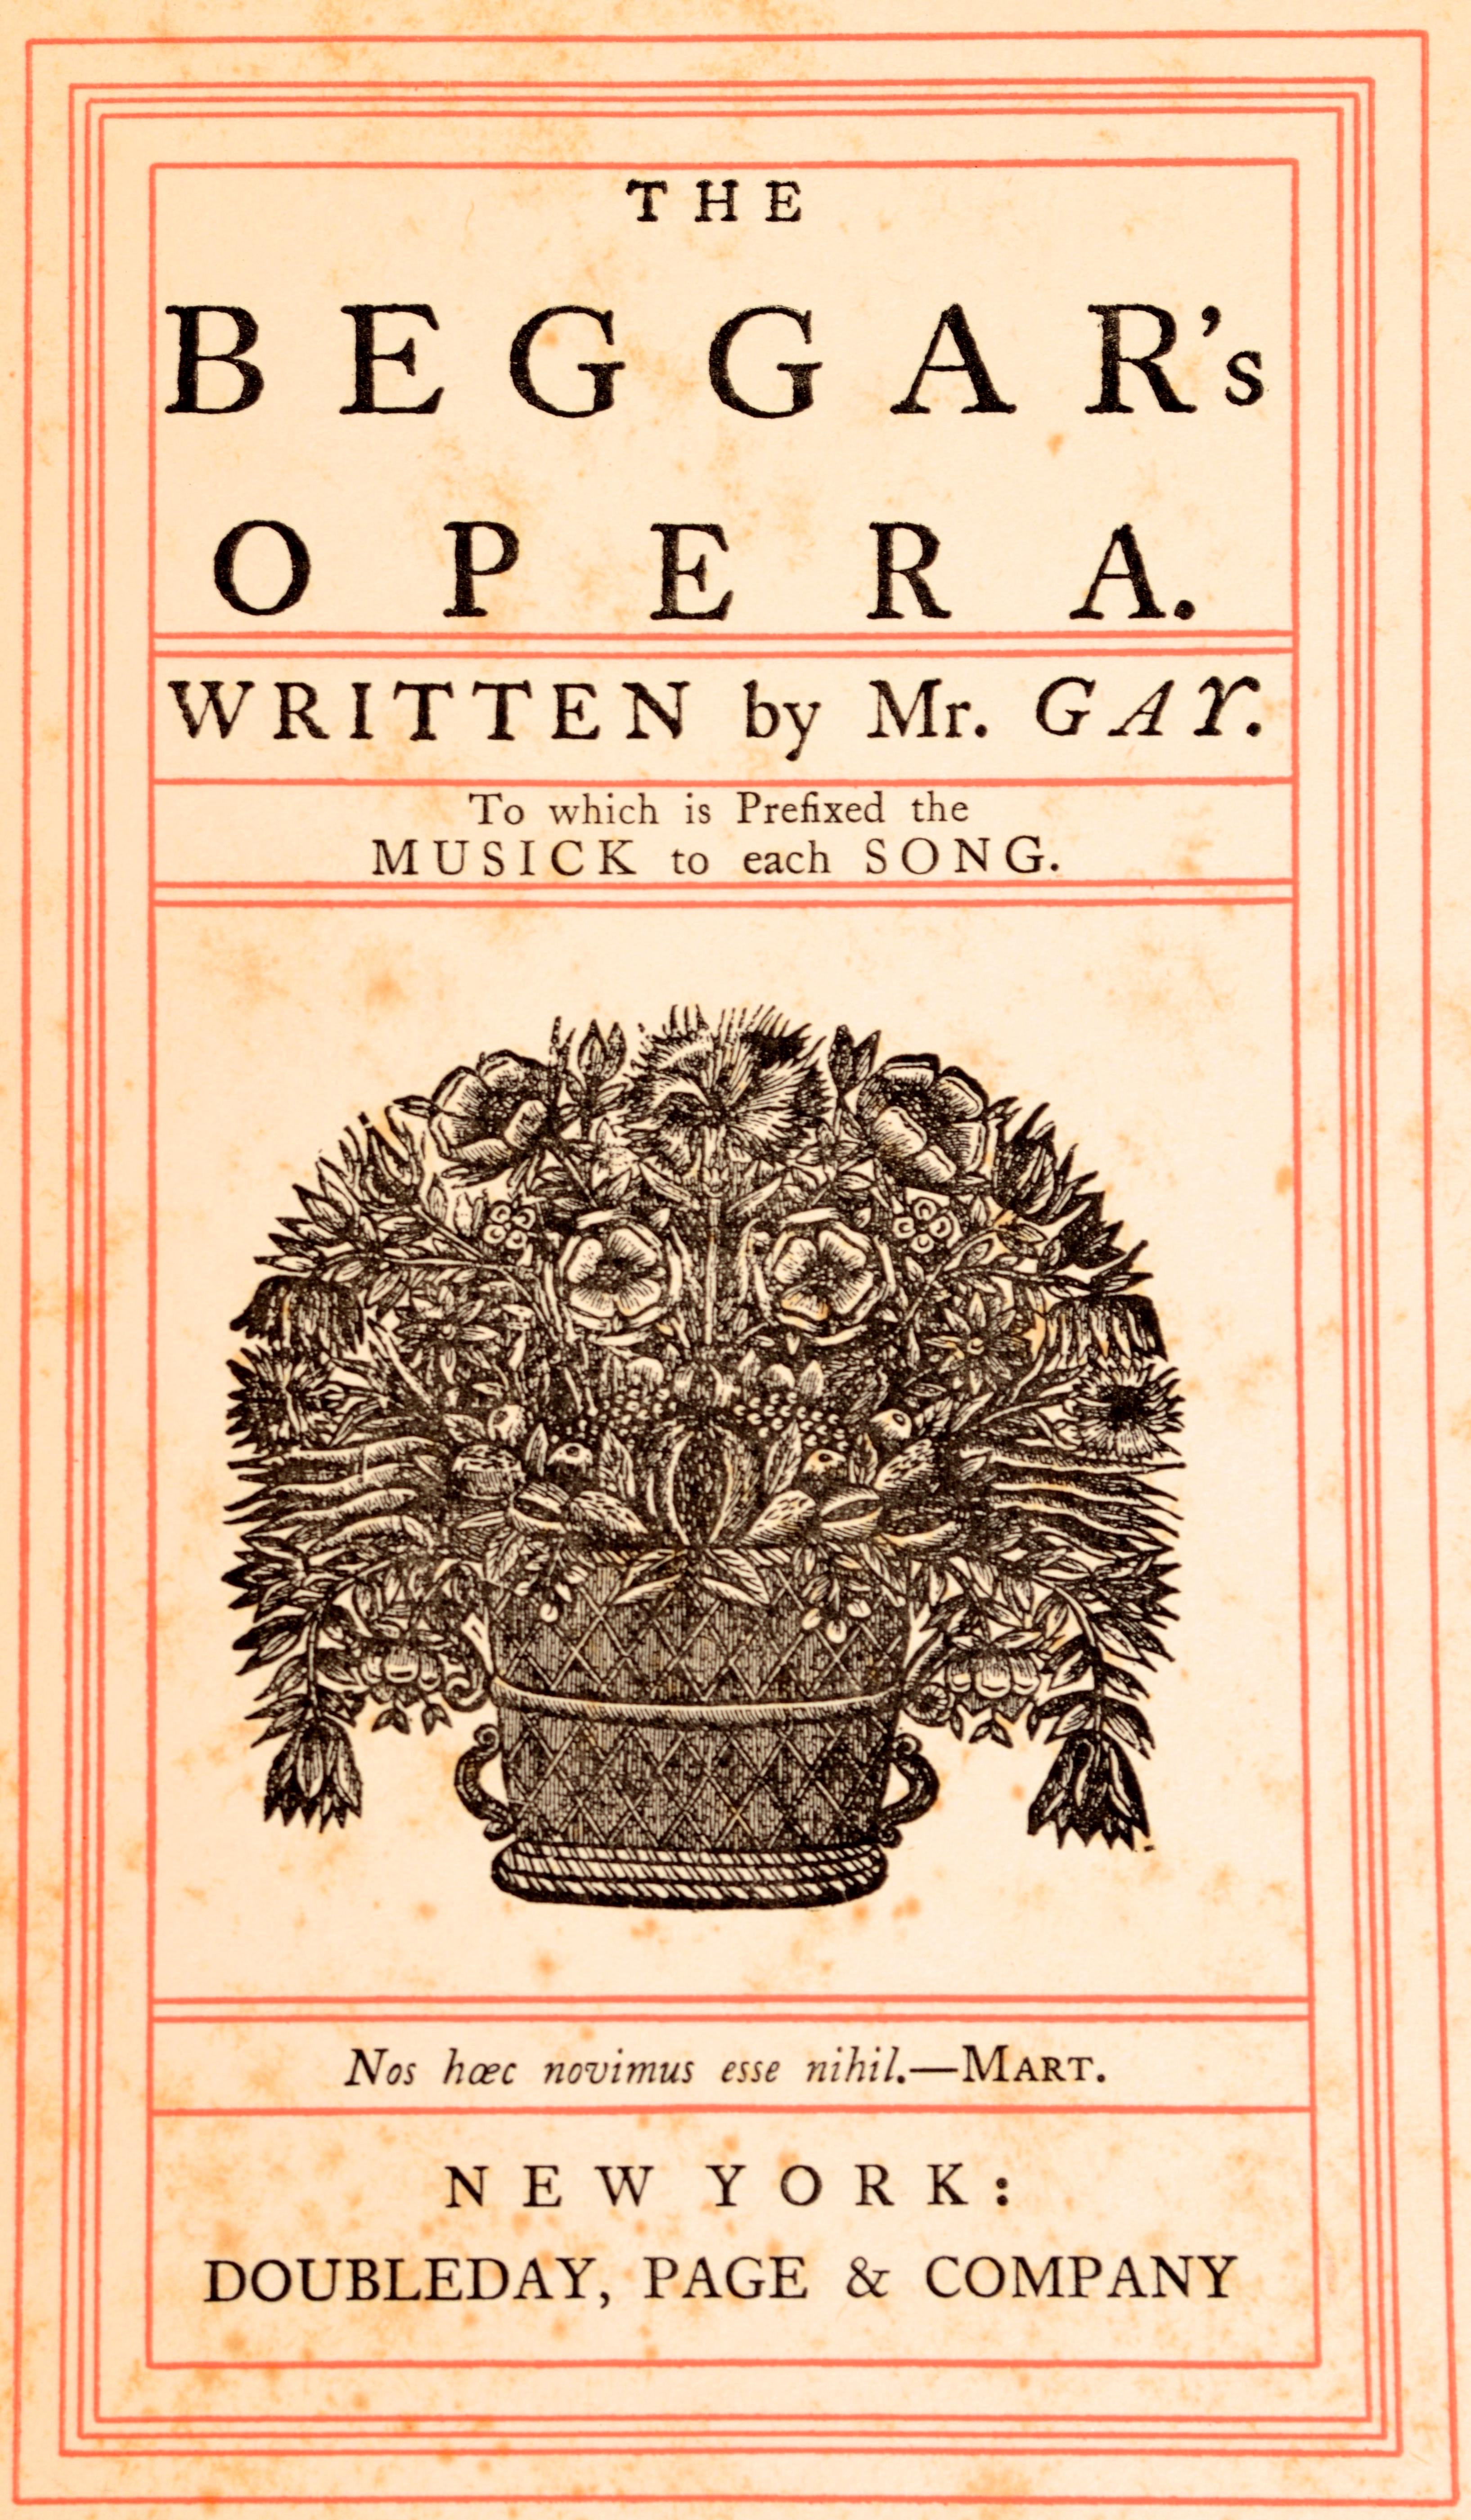 Beggar's Opera by Mr. Gay, Nelson Doubleday's Personal Copy with His Bookplate For Sale 1